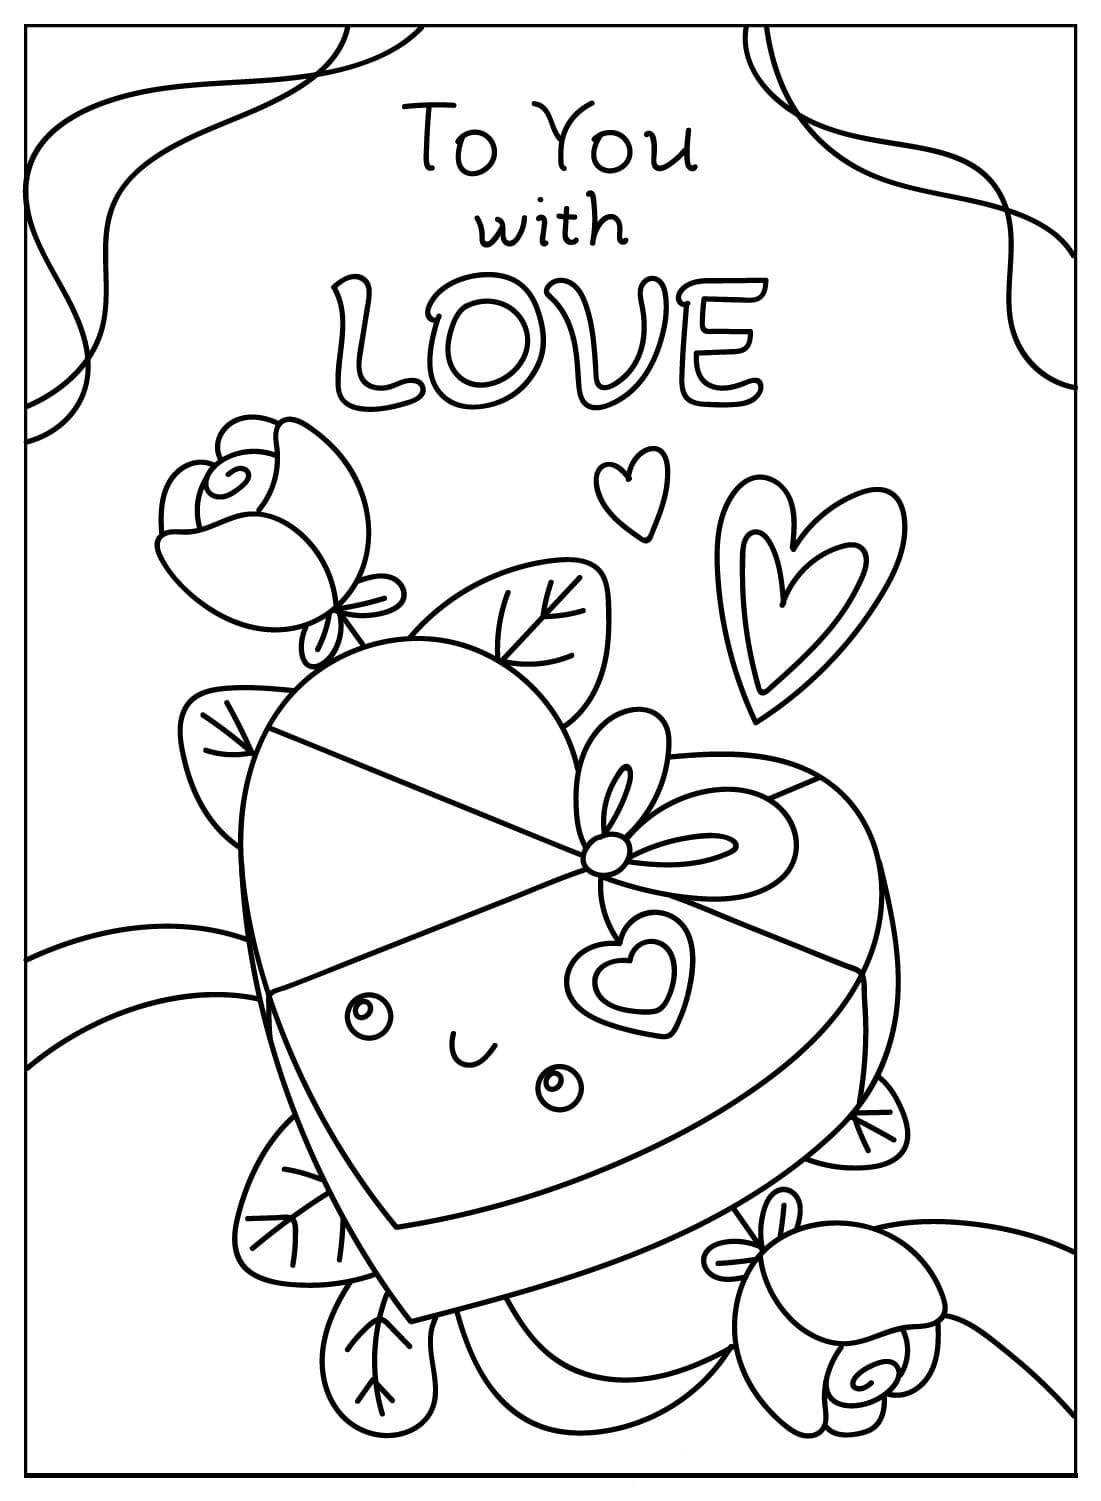 Free Valentines Day Cards Coloring Page